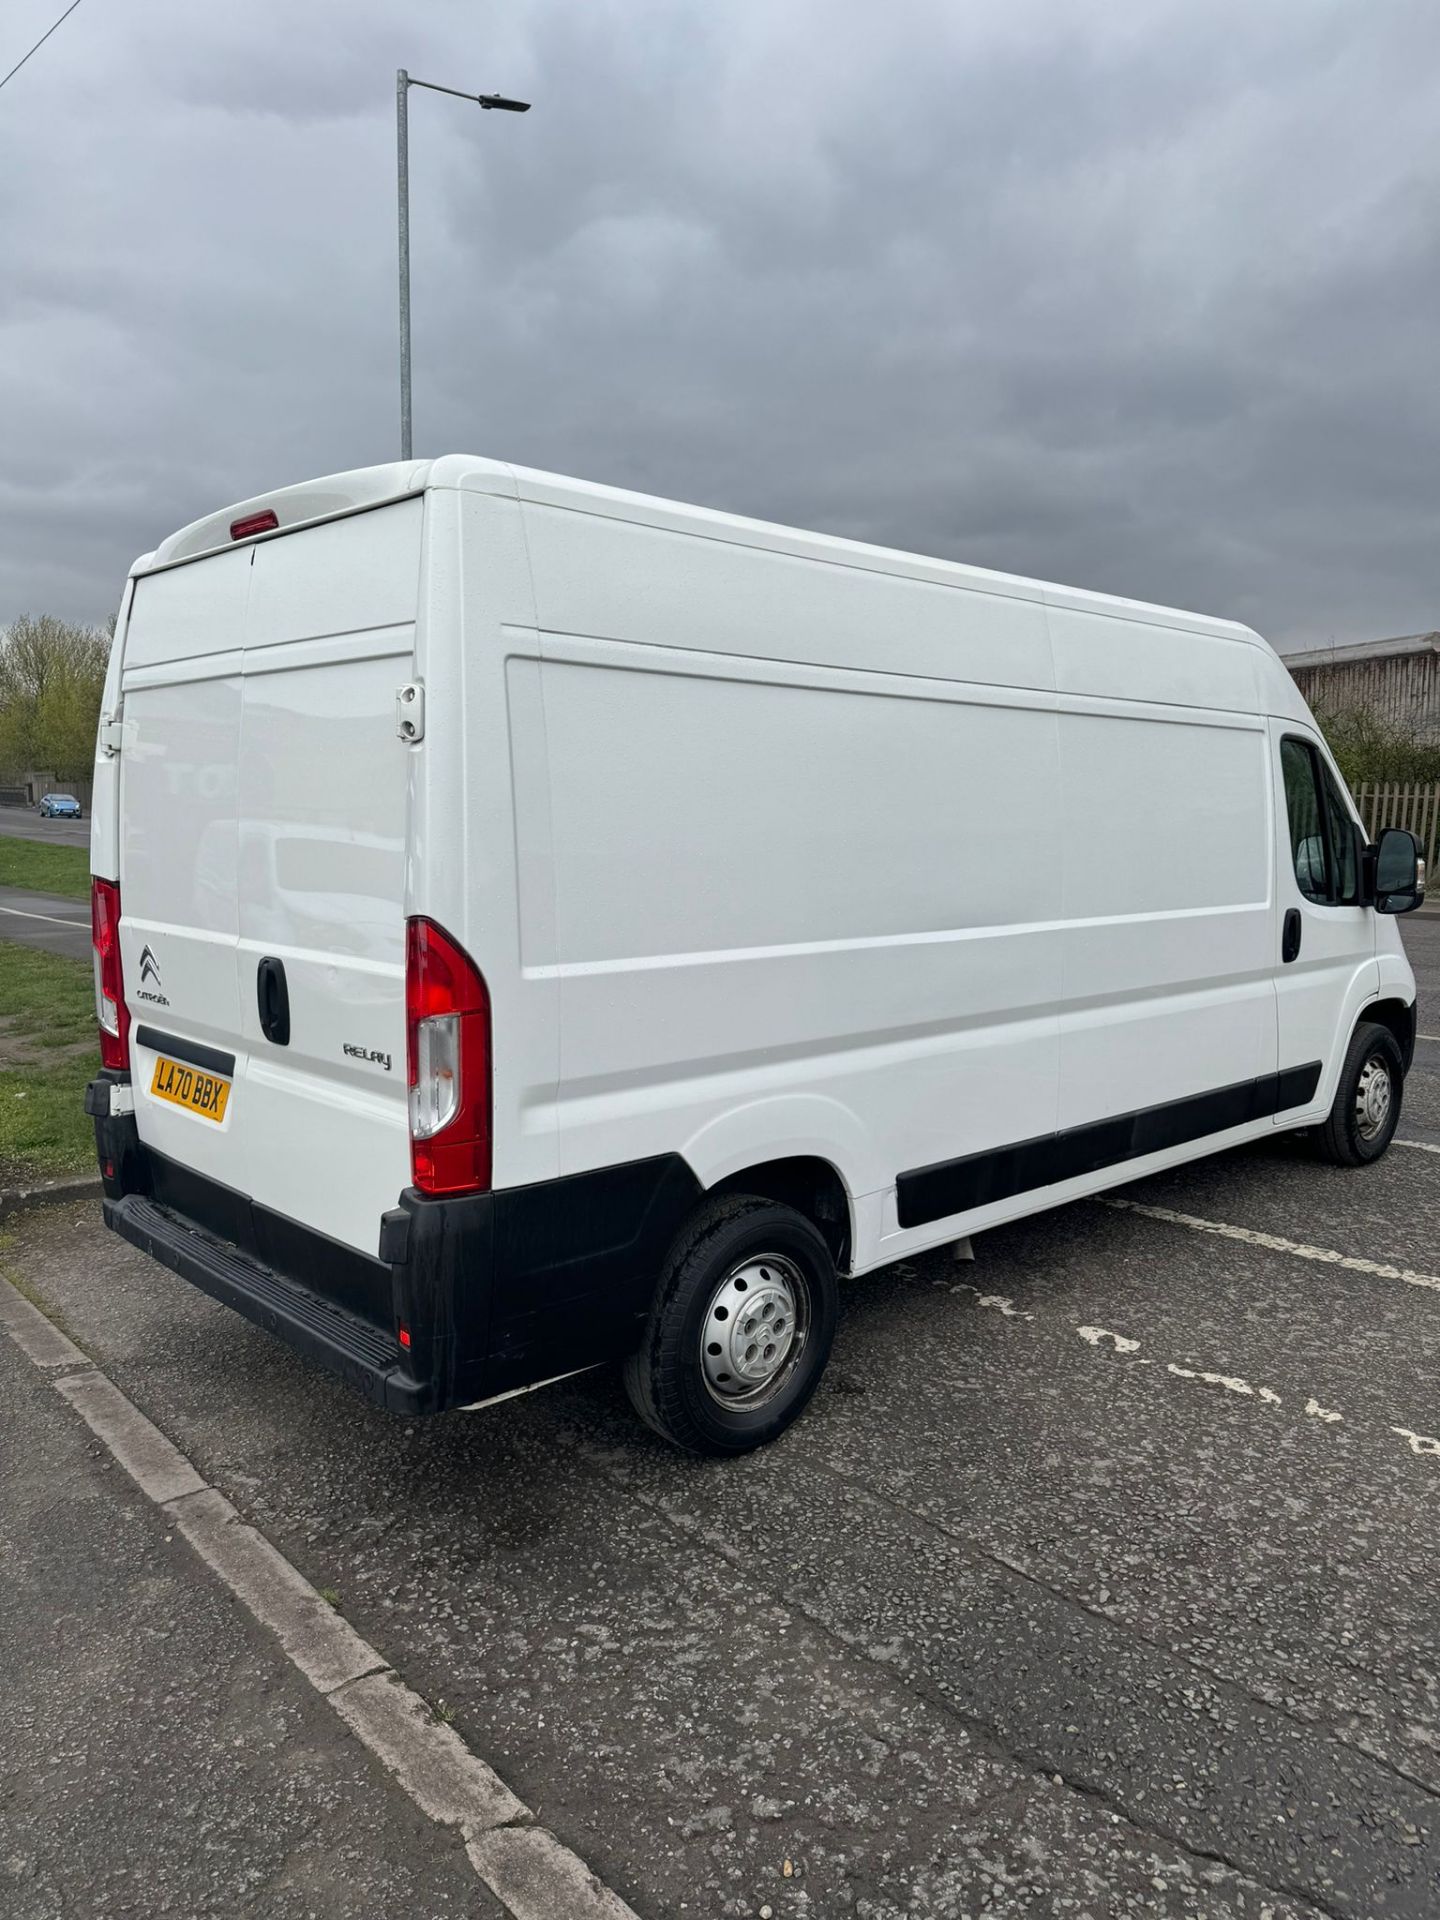 2020 70 CITROEN RELAY L3 H2 PANEL VAN - 56K MILES - PLY LINED - AIR CON. - Image 9 of 12